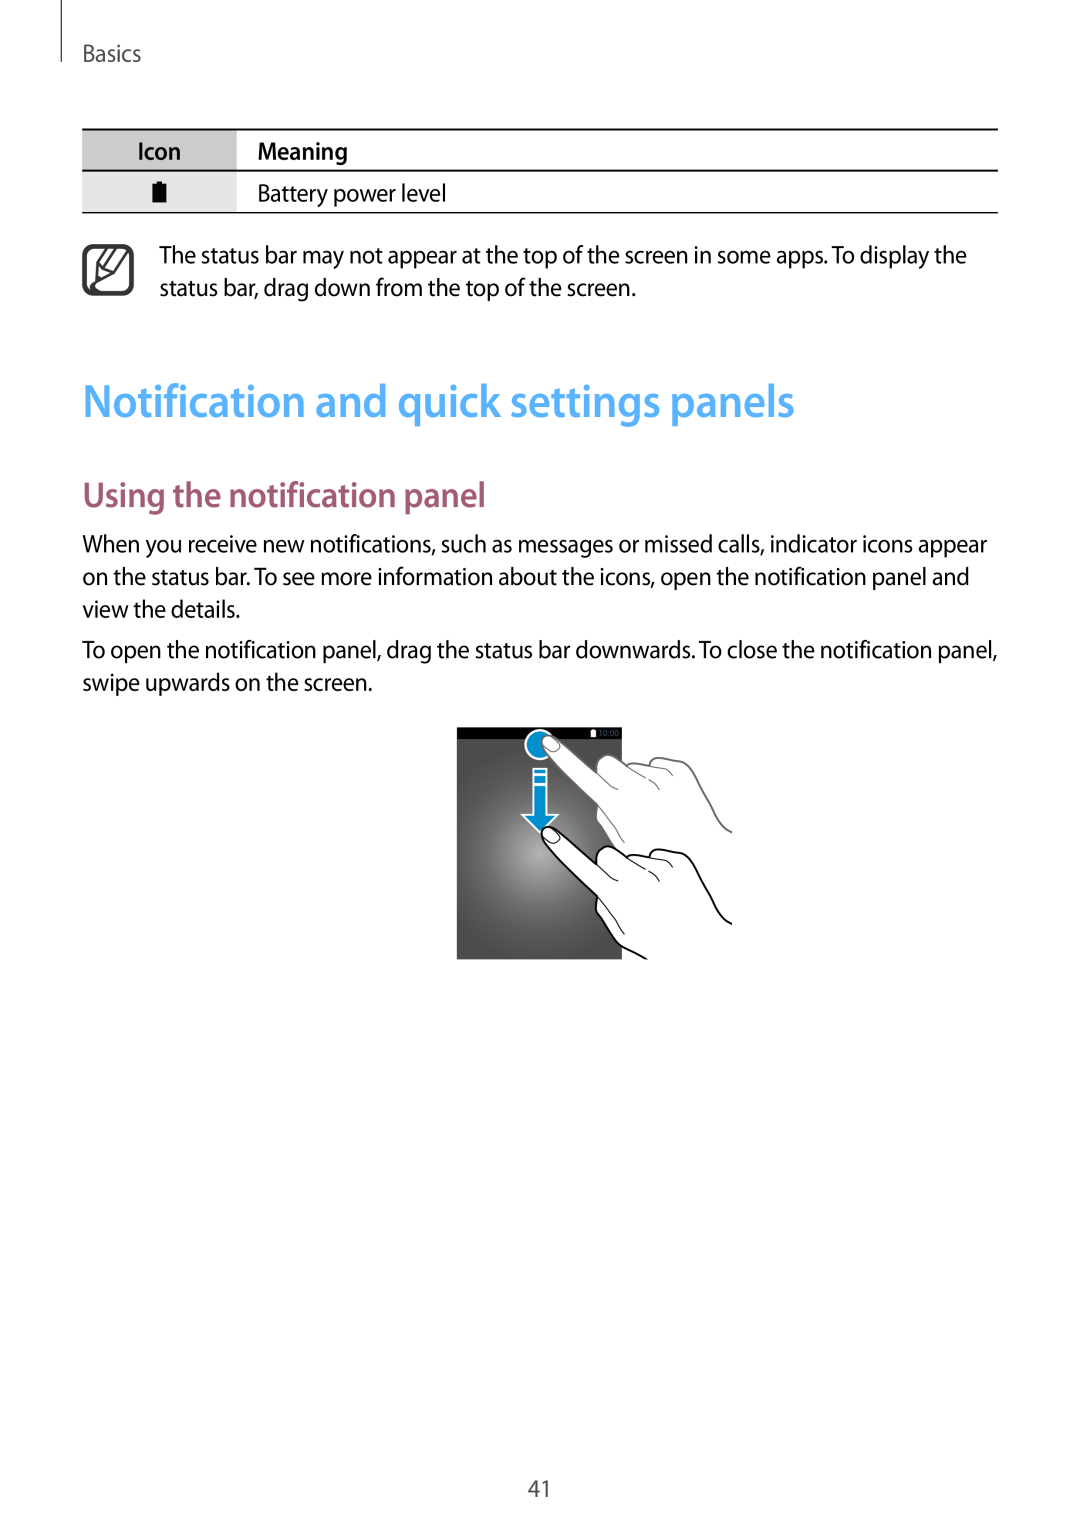 Samsung SM-N915FZKYXEF manual Notification and quick settings panels, Using the notification panel, Icon Meaning, Basics 